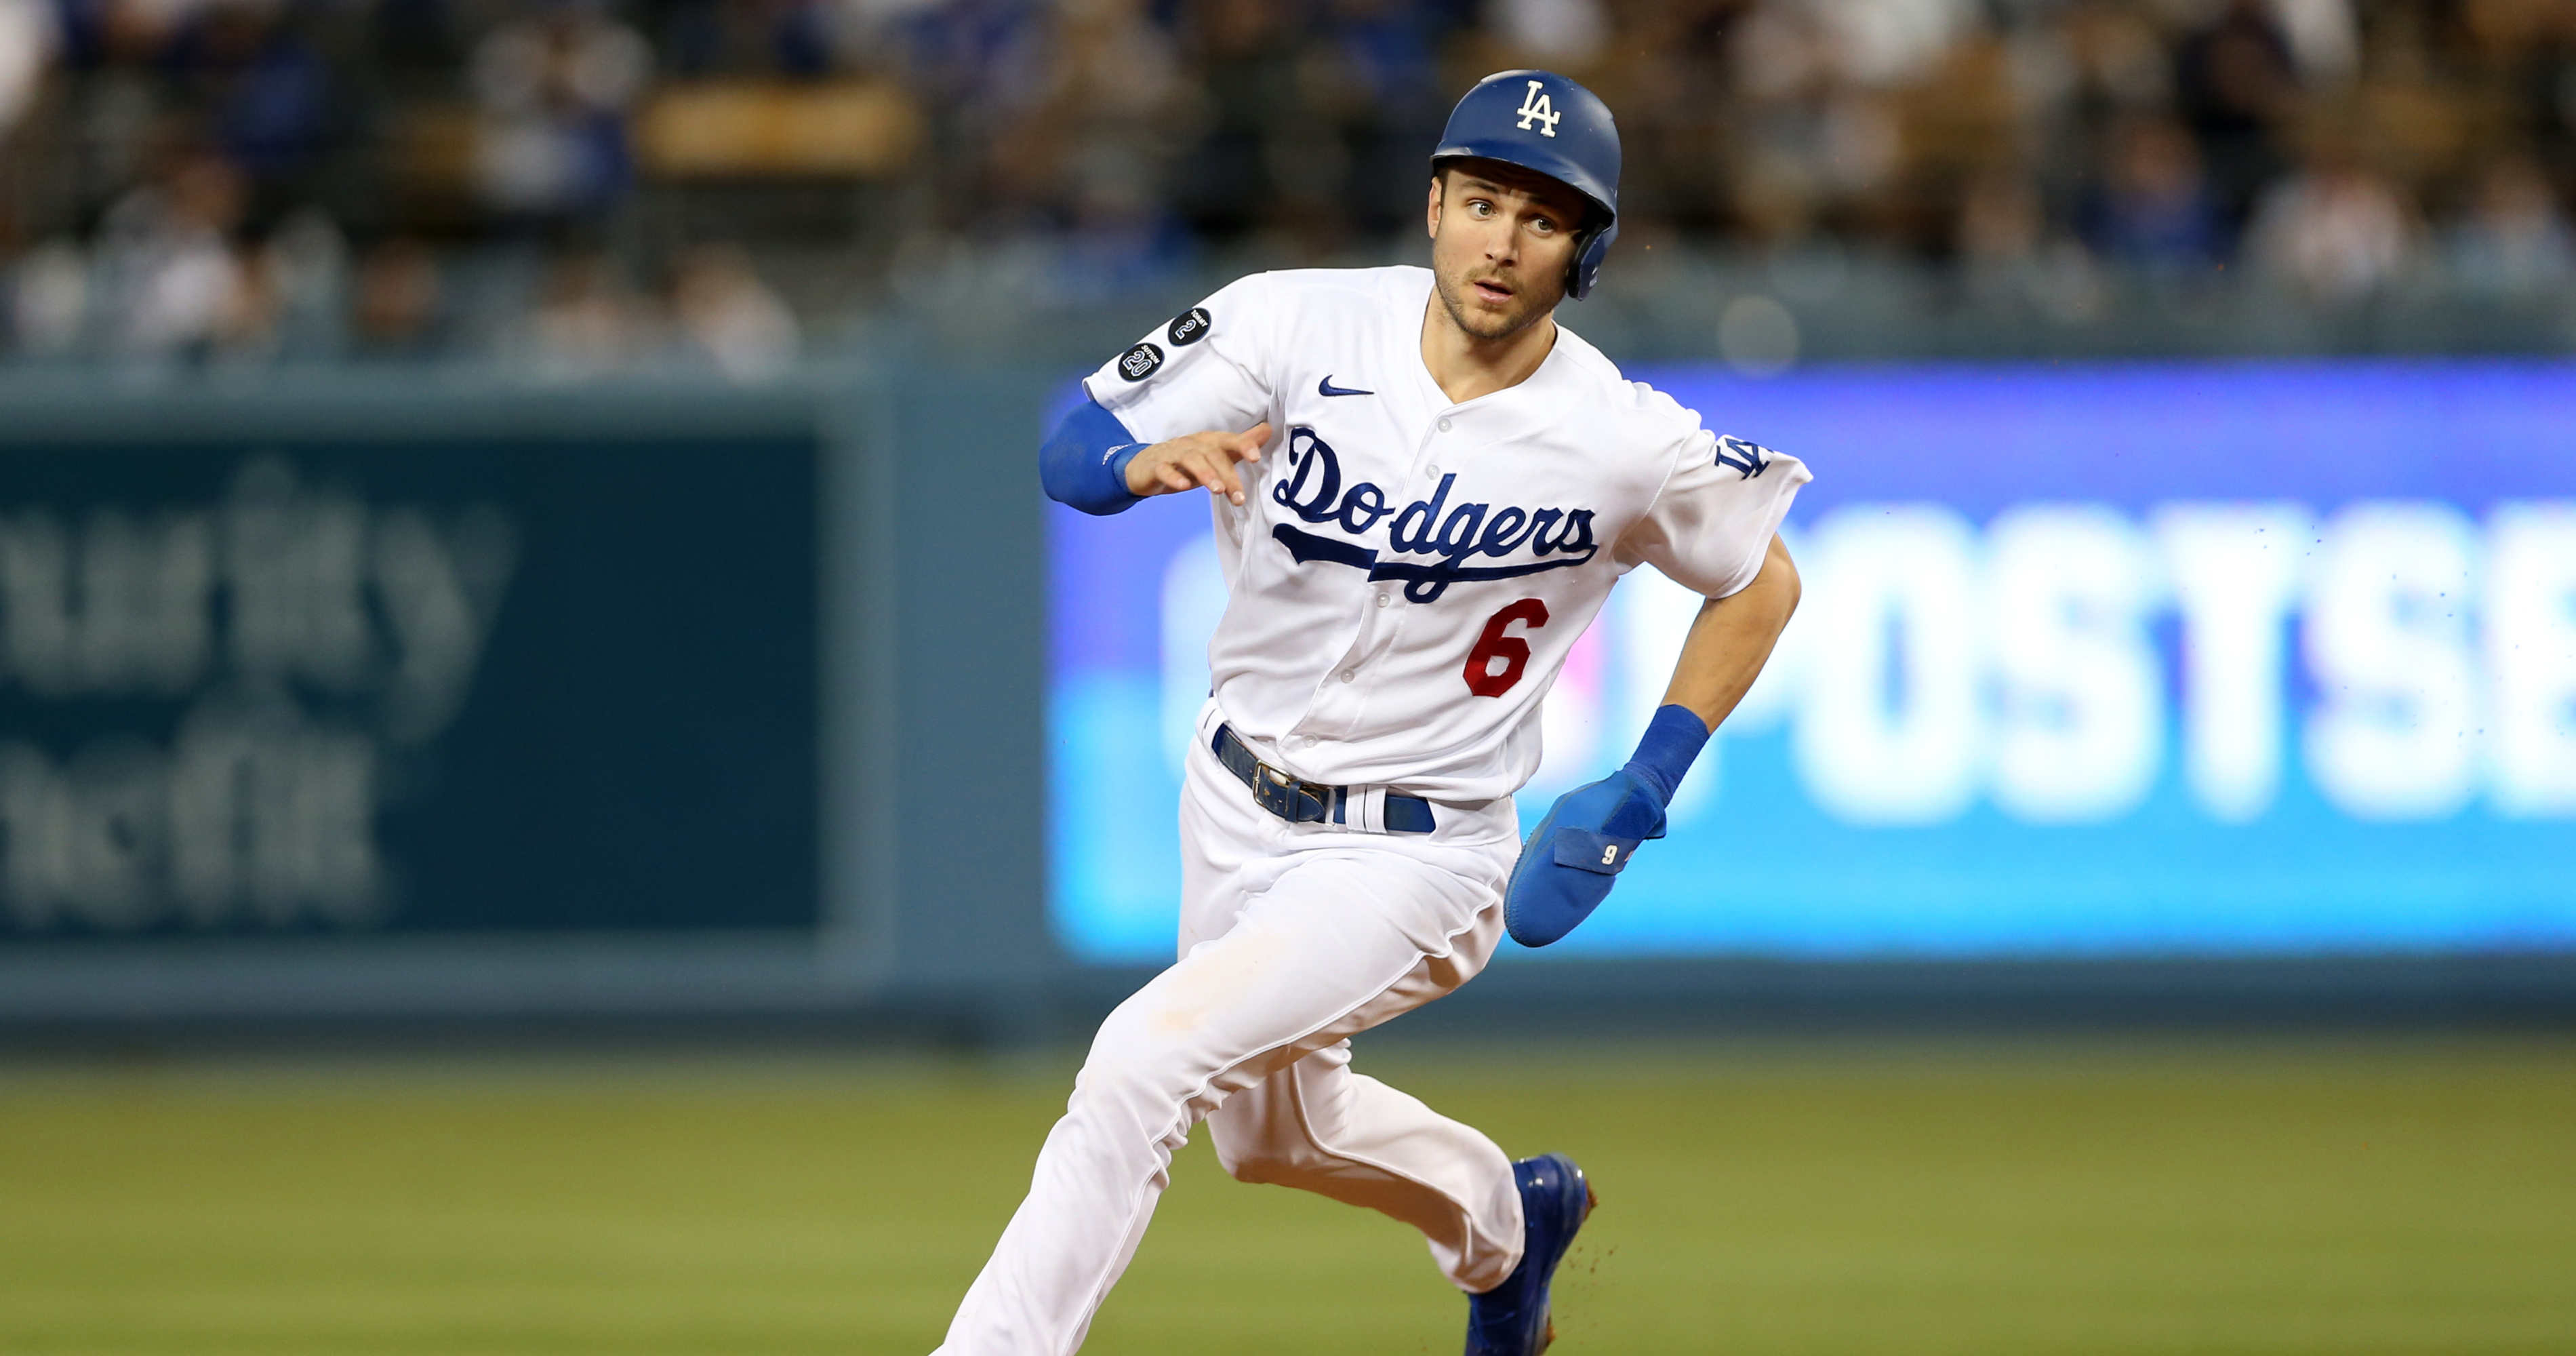 Report: Trea Turner, Dodgers Agree to $21M Contract Ahead of